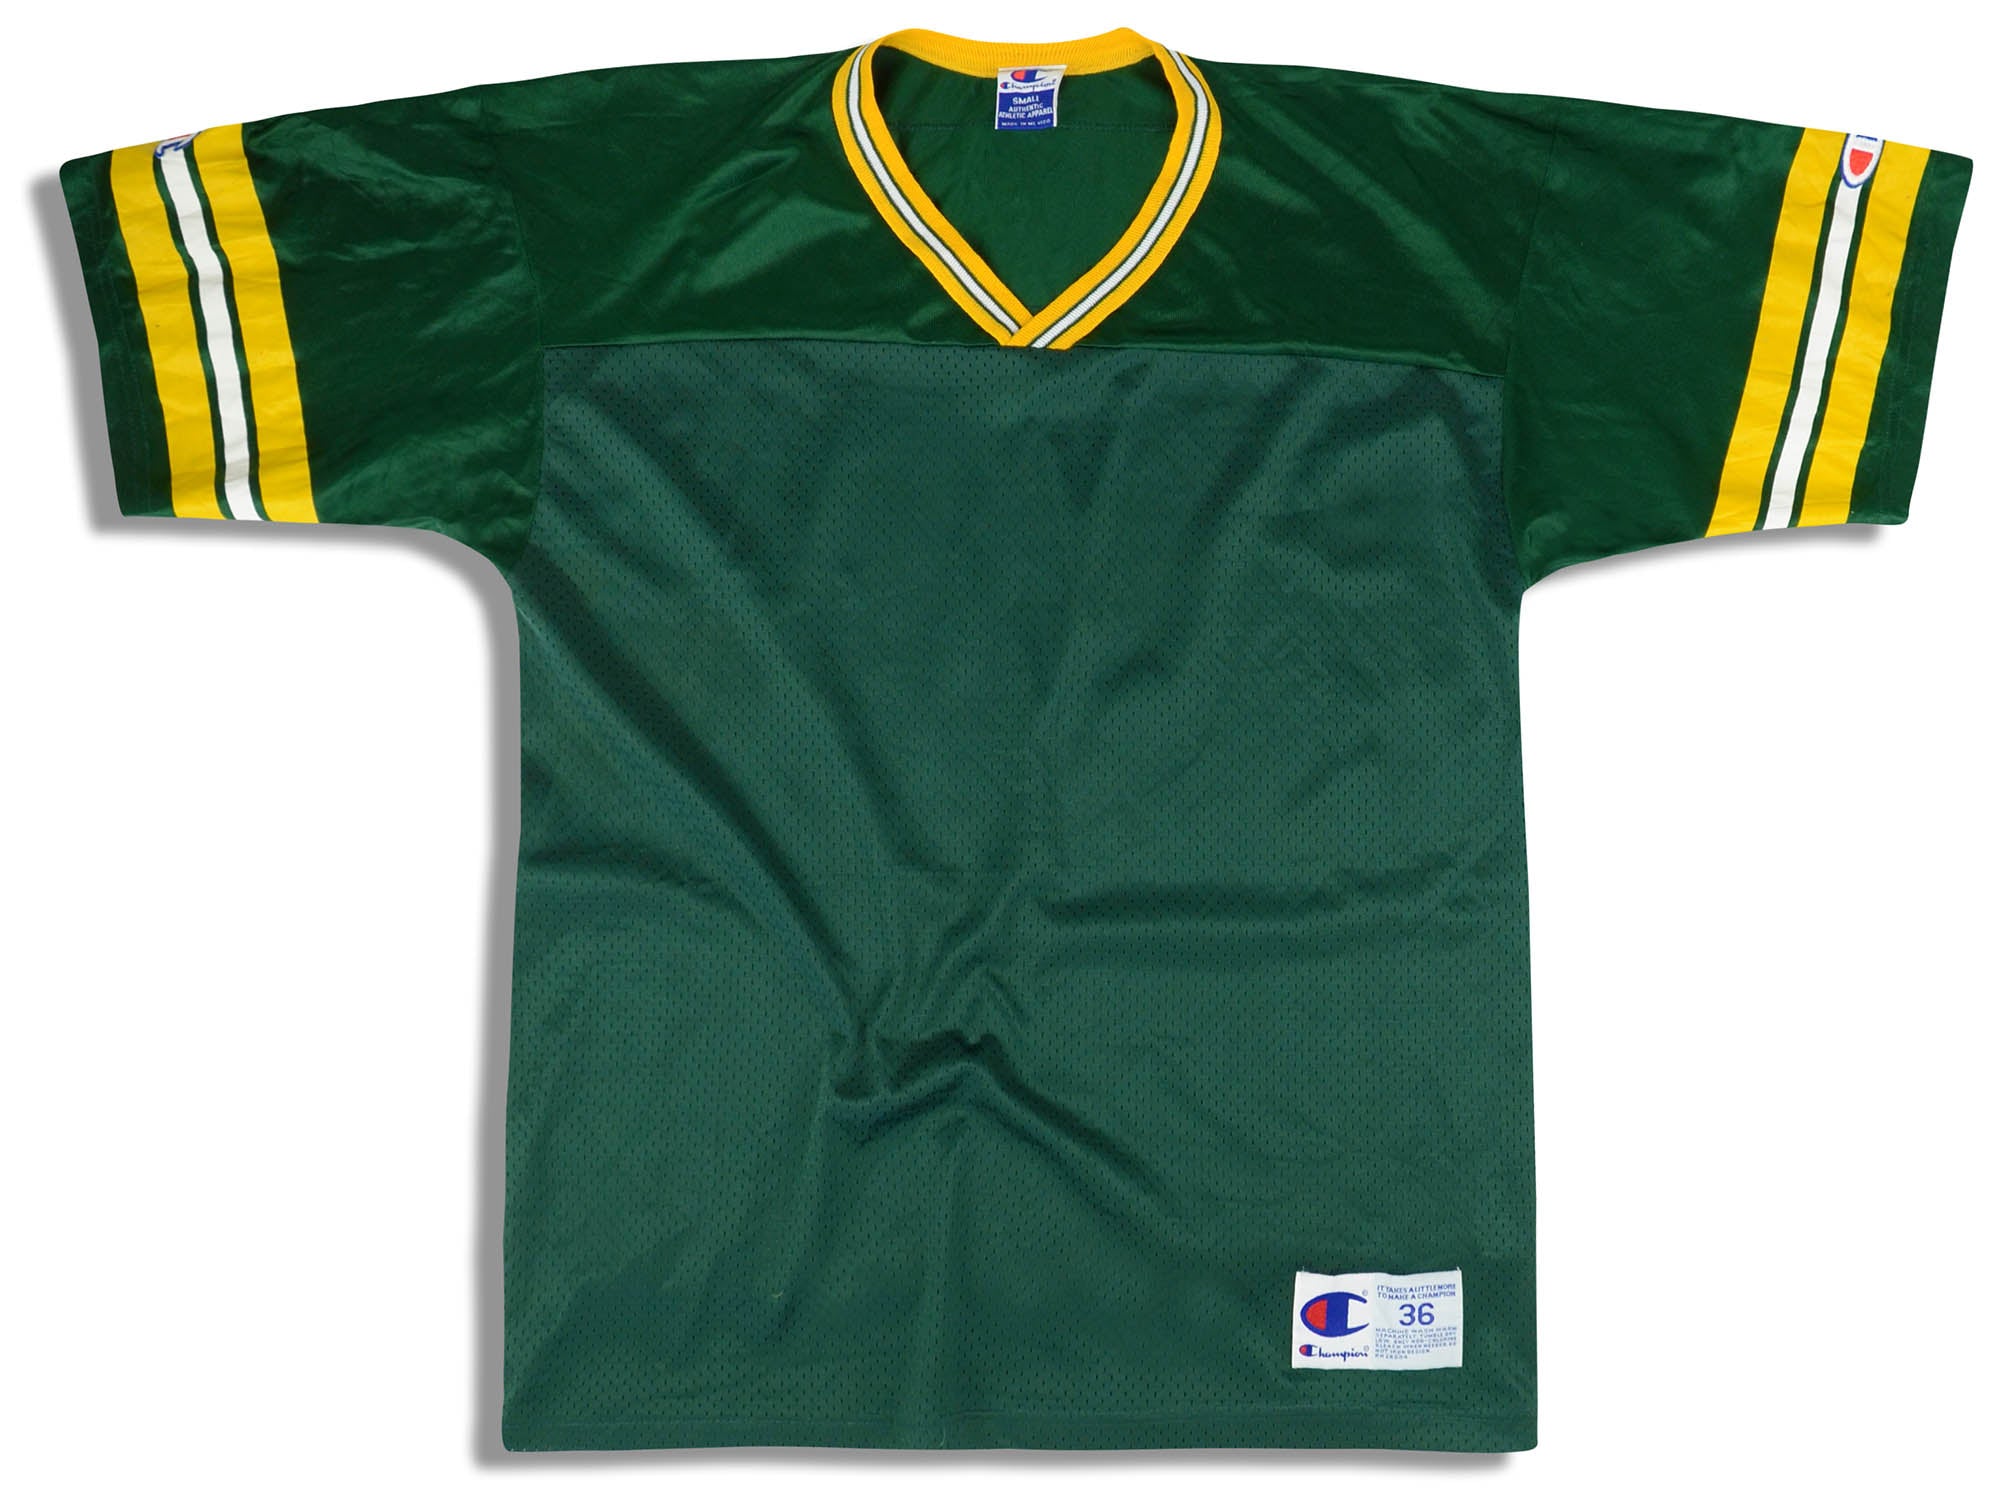 1990's GREEN BAY PACKERS CHAMPION JERSEY (HOME) S